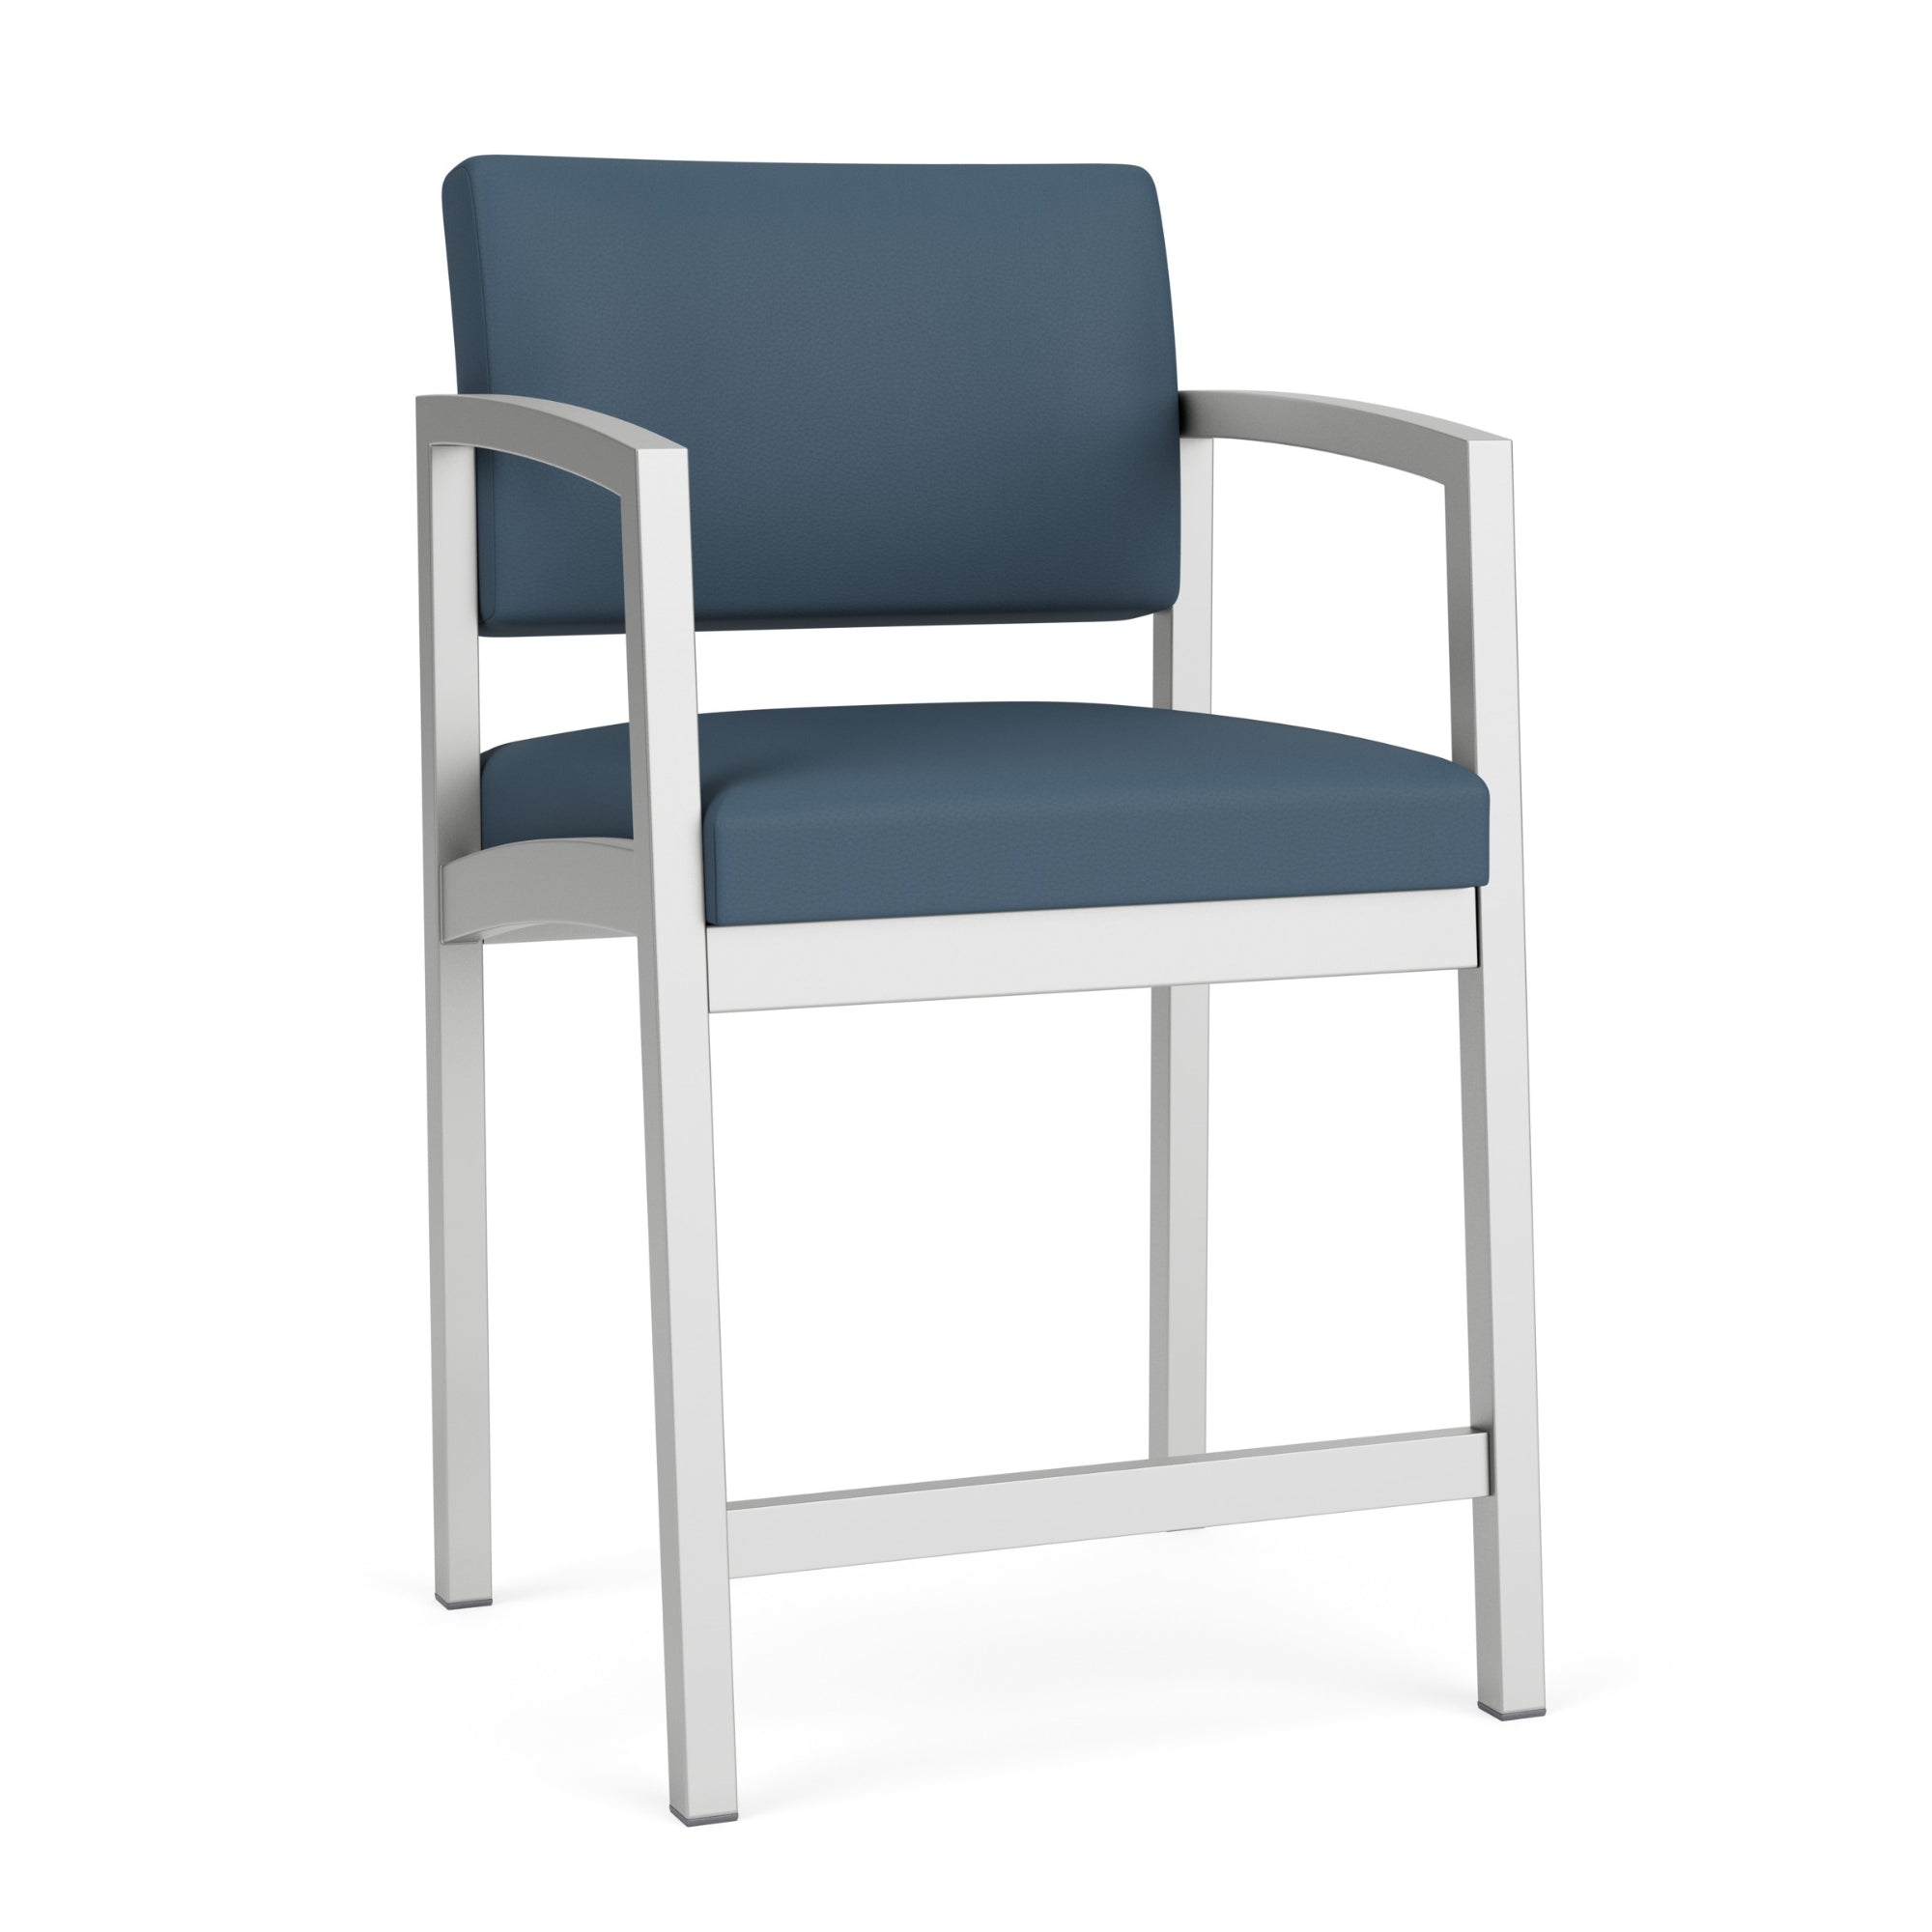 Lenox Steel Collection Reception Seating, Hip Chair, Healthcare Vinyl Upholstery, FREE SHIPPING